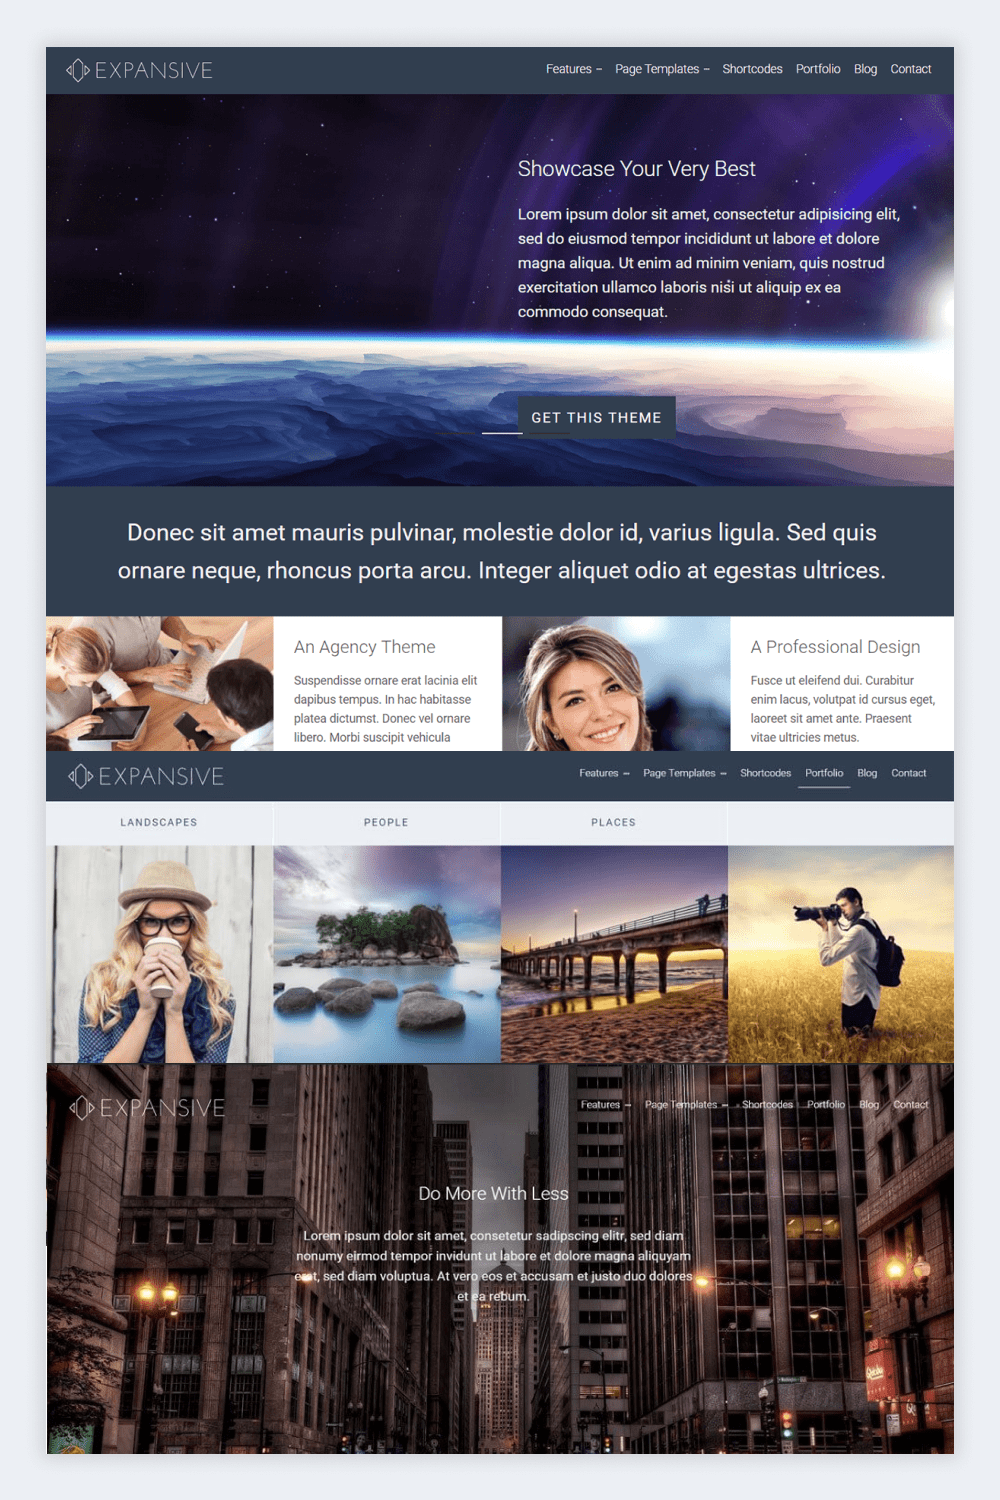 Collage of Landing Page Screenshots with Slider, Benefits and Photos.